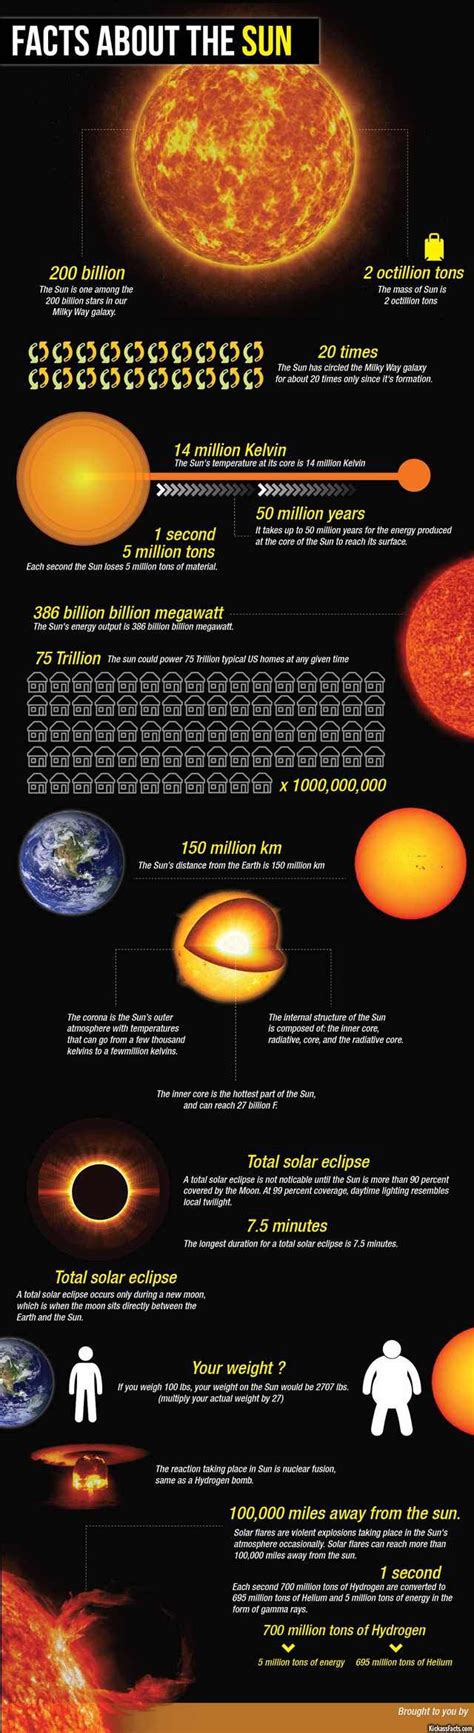 How Far Away Is The Sun From Earth In Miles